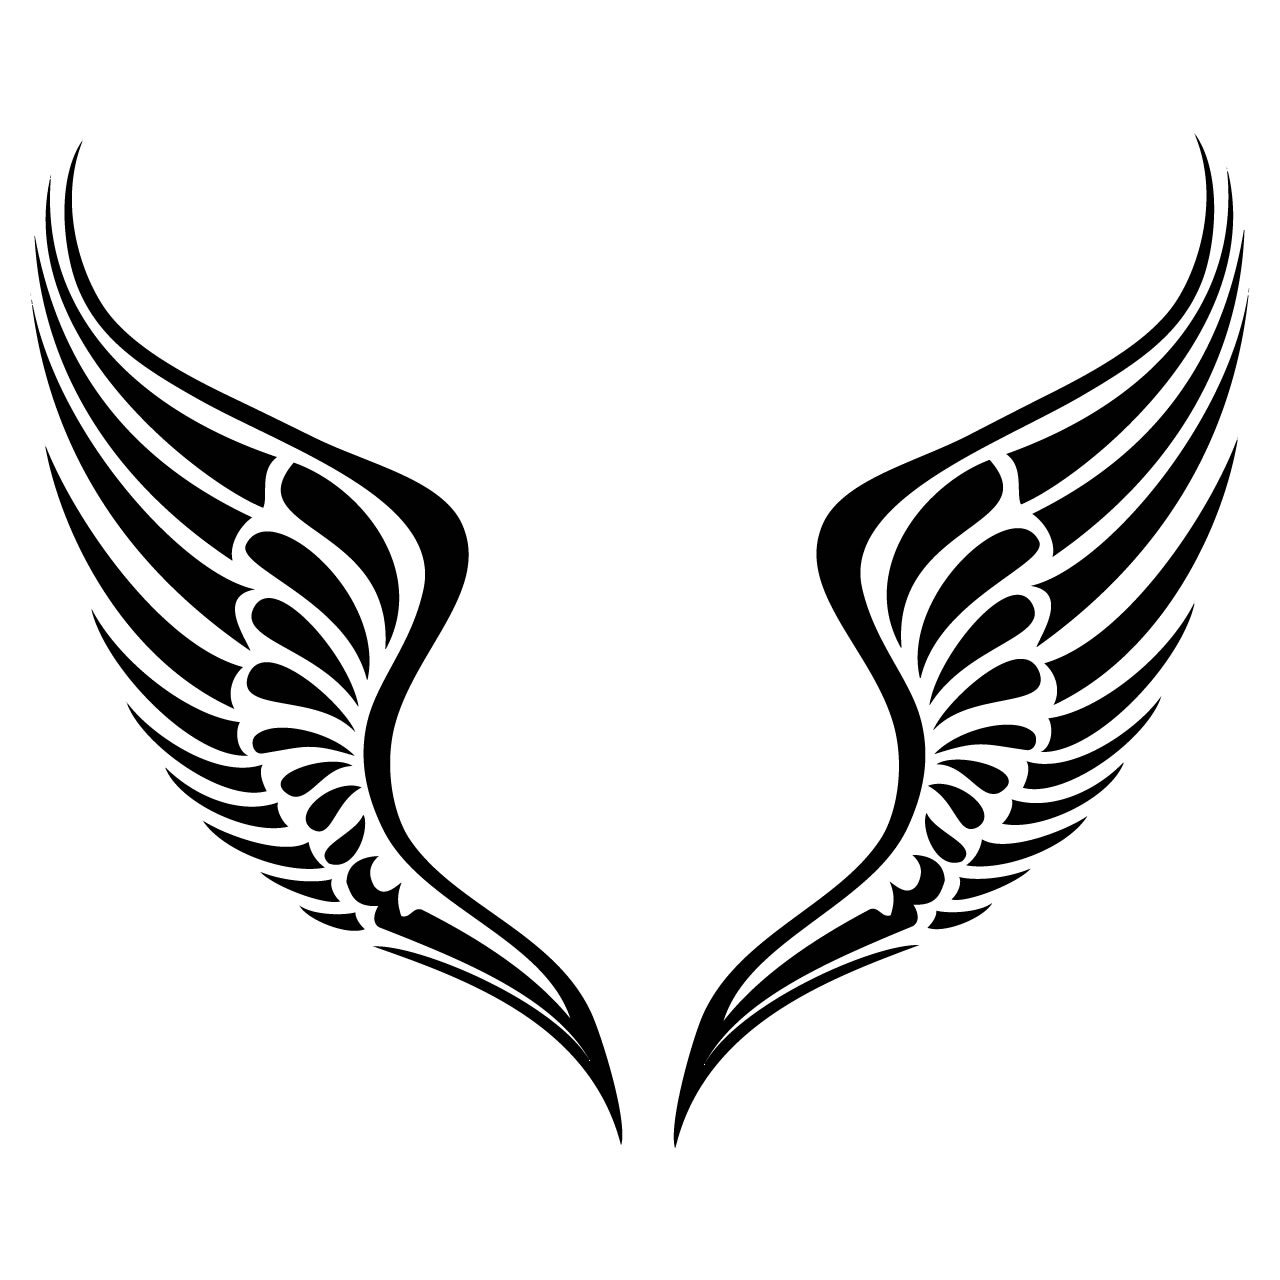 Angel wings free angel wing clip art free vector for free download 3